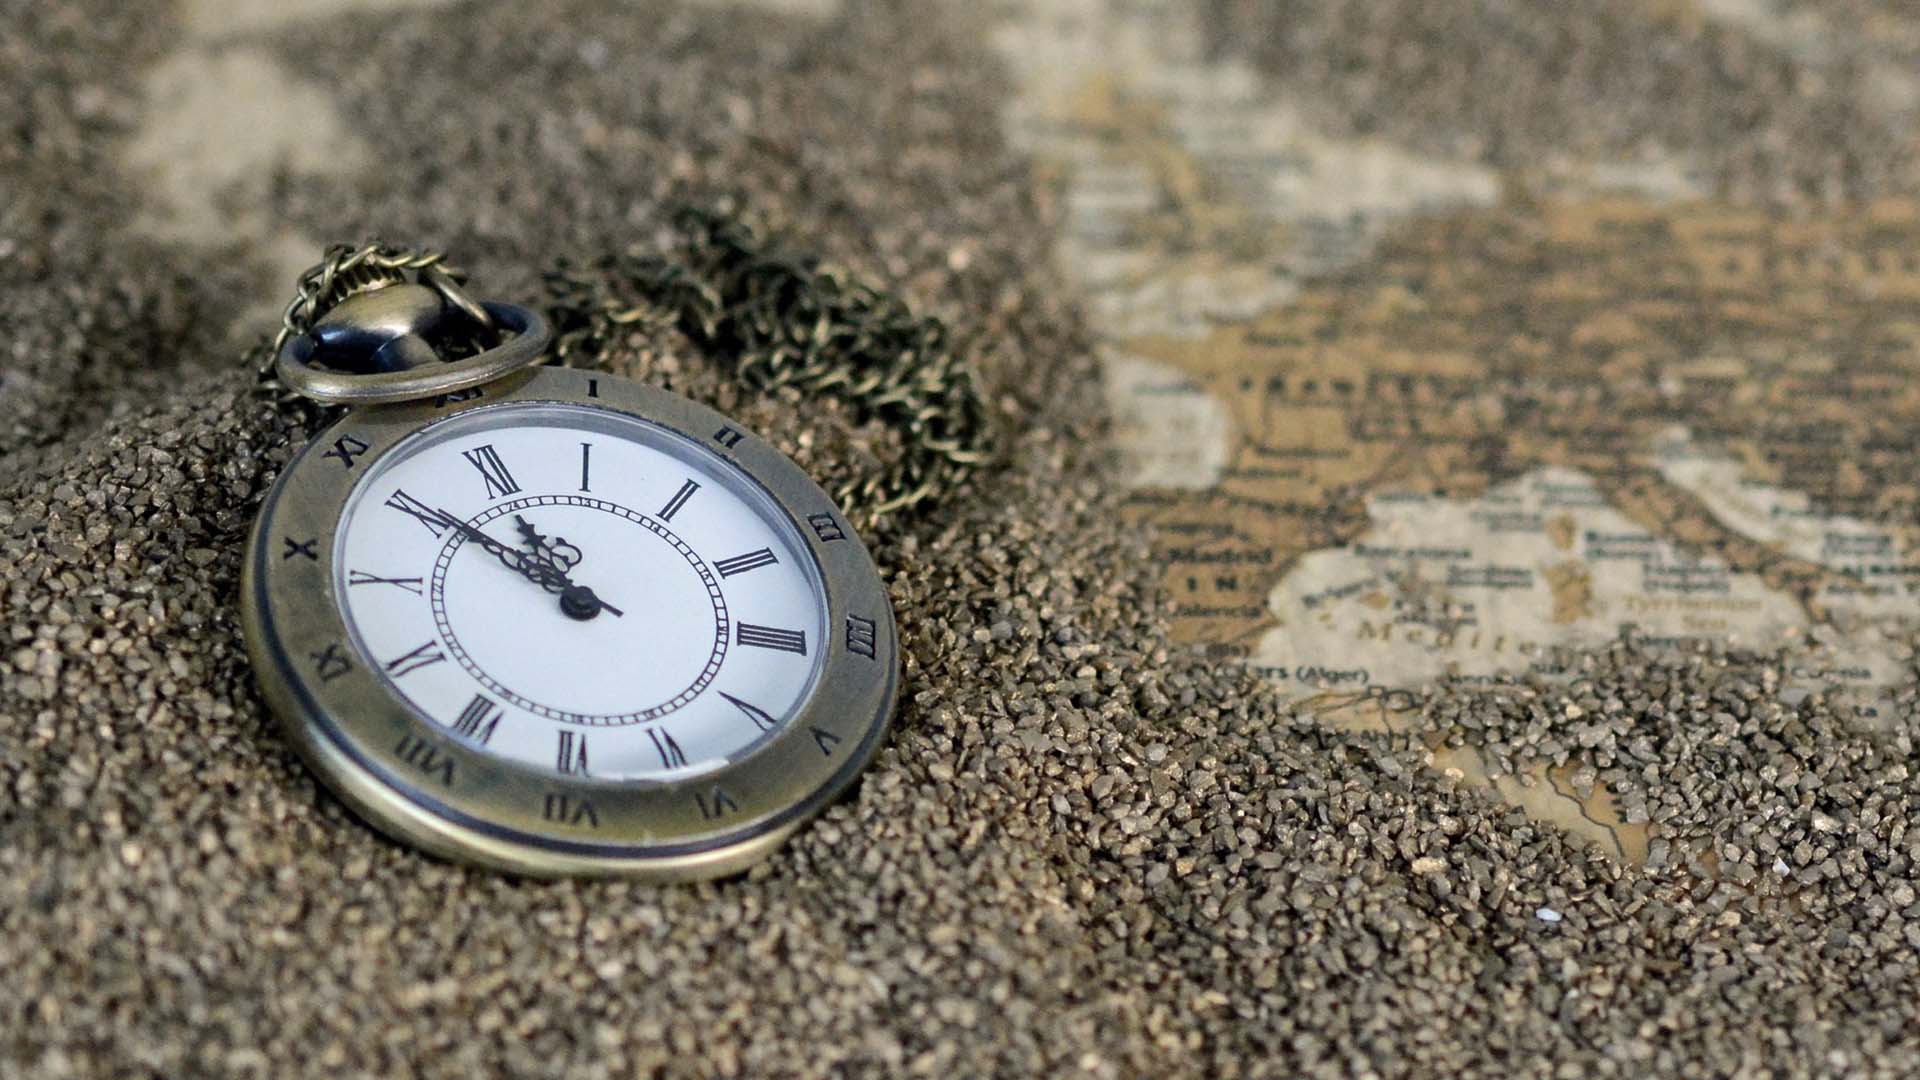 Bible Central Chronology Topic Guide. Image of pocketwatch by anncapictures via Pixabay.